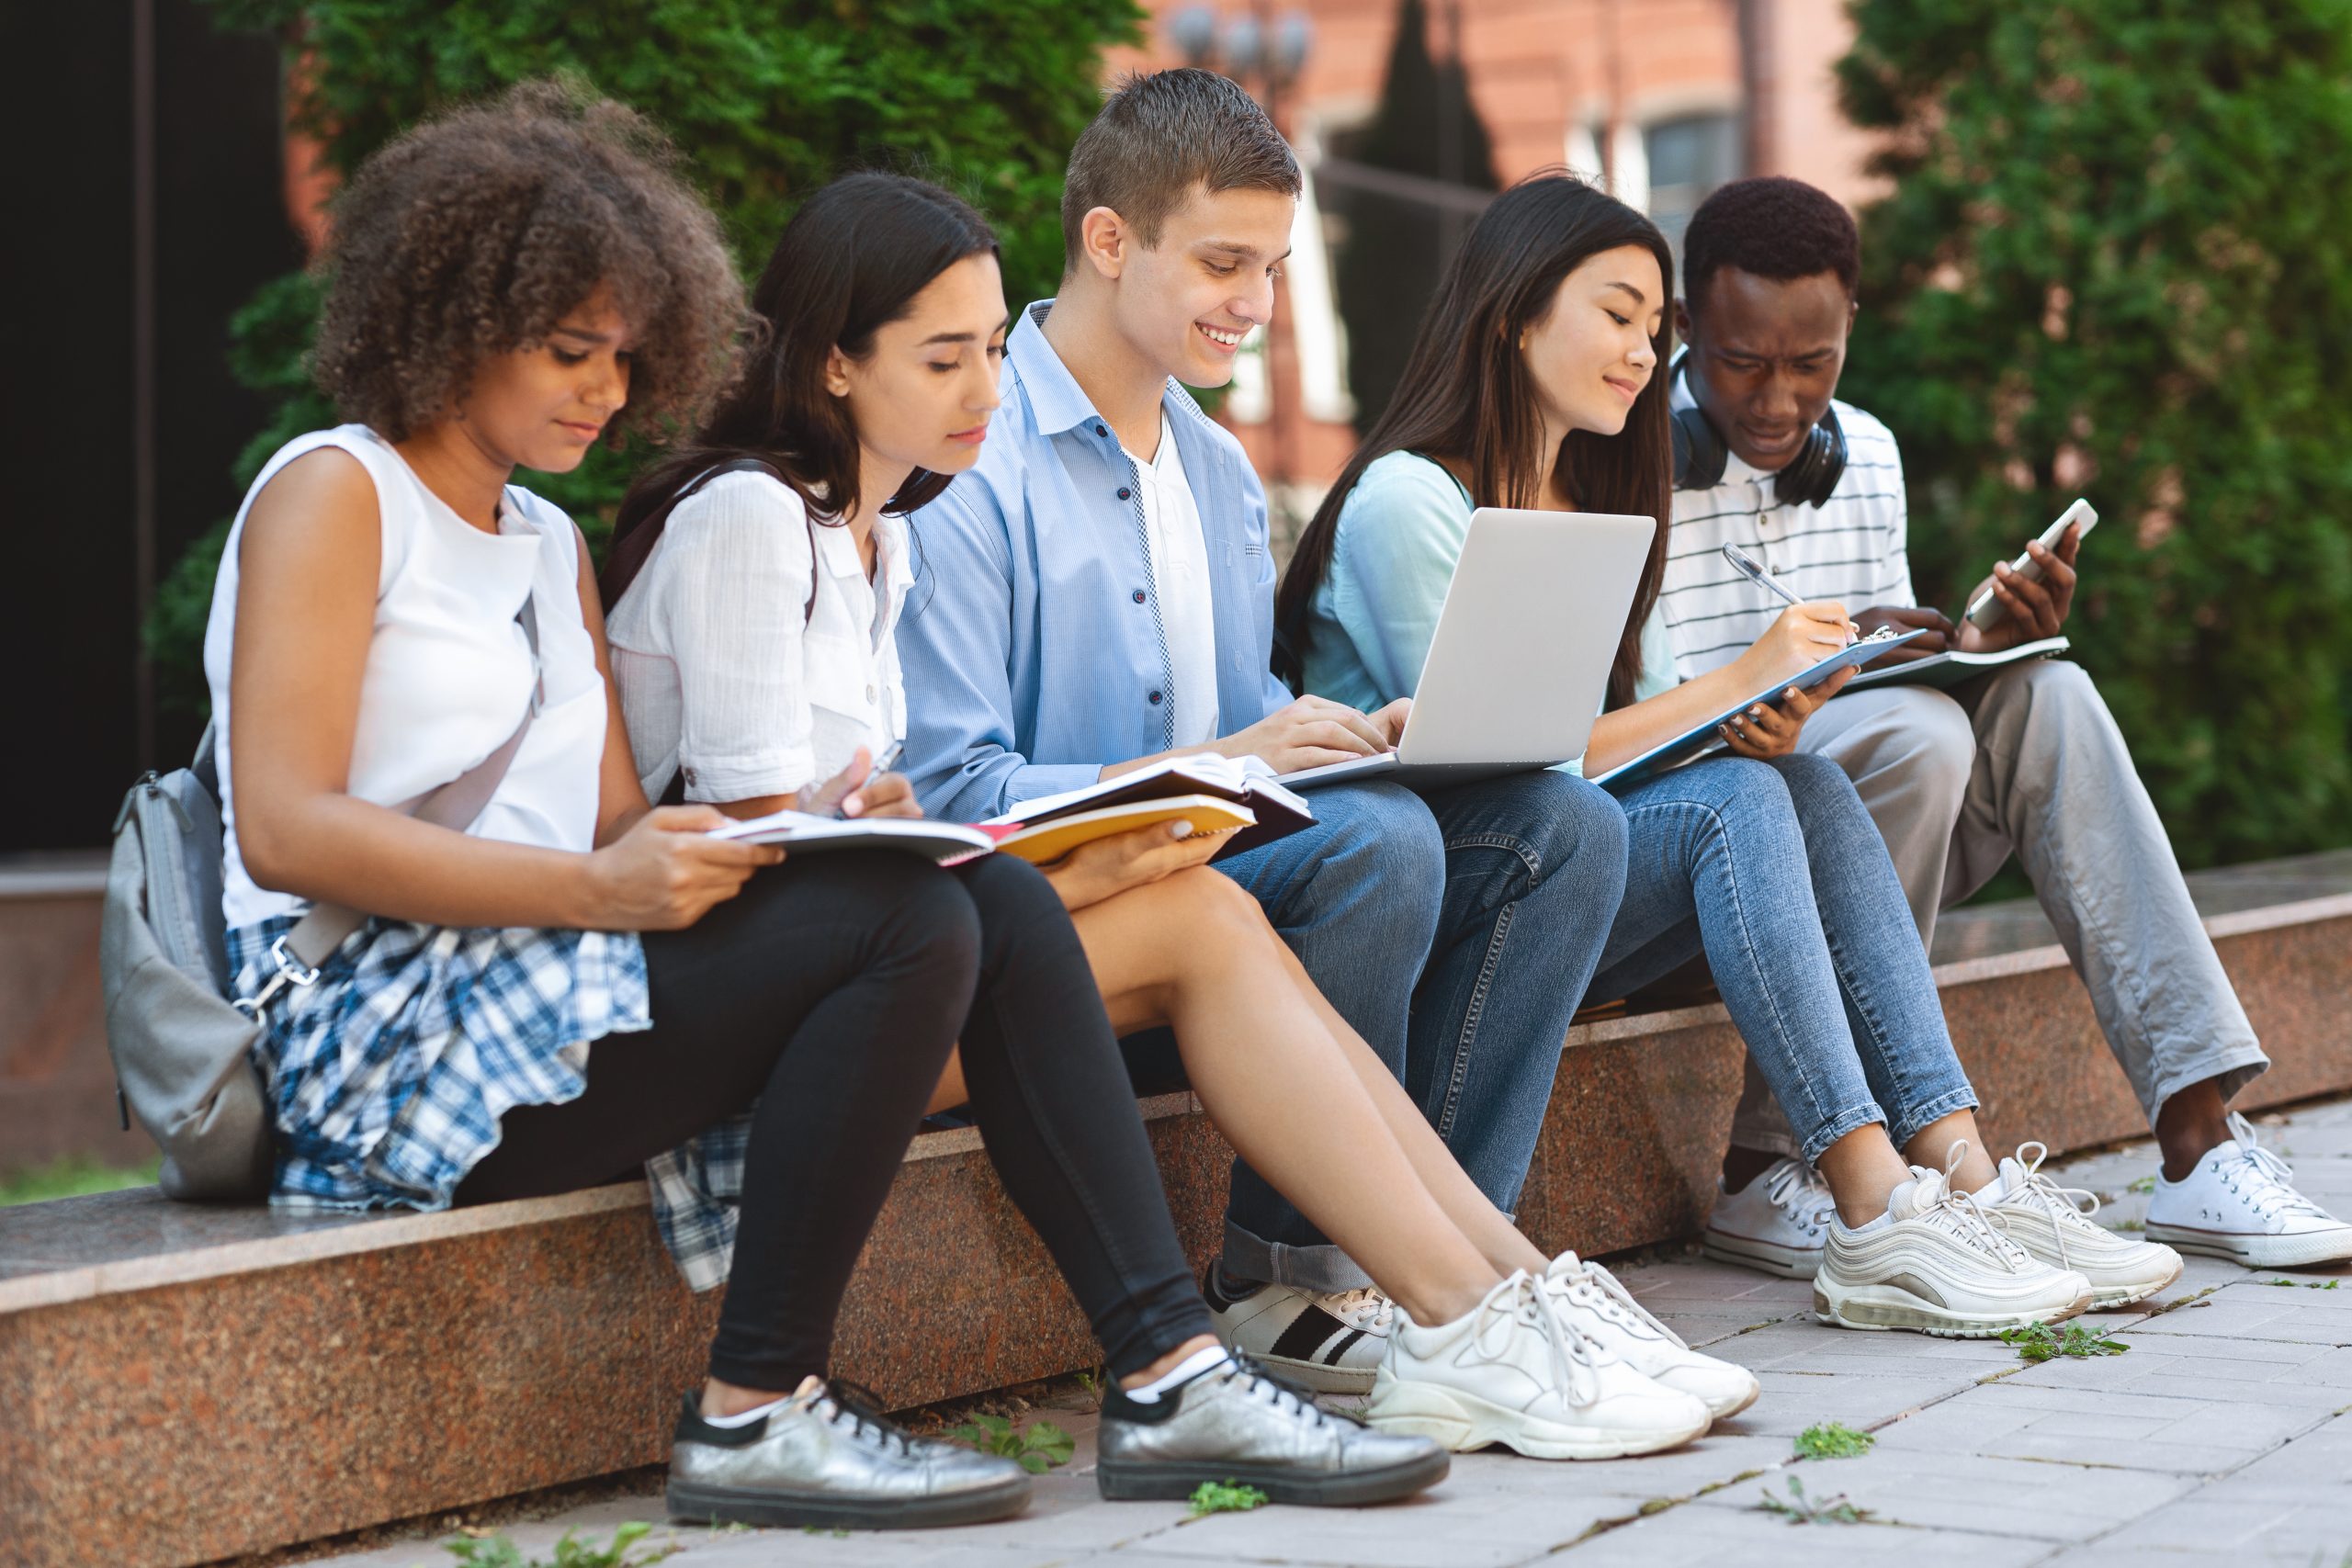 A group of teens reading and taking notes seated on a bench.